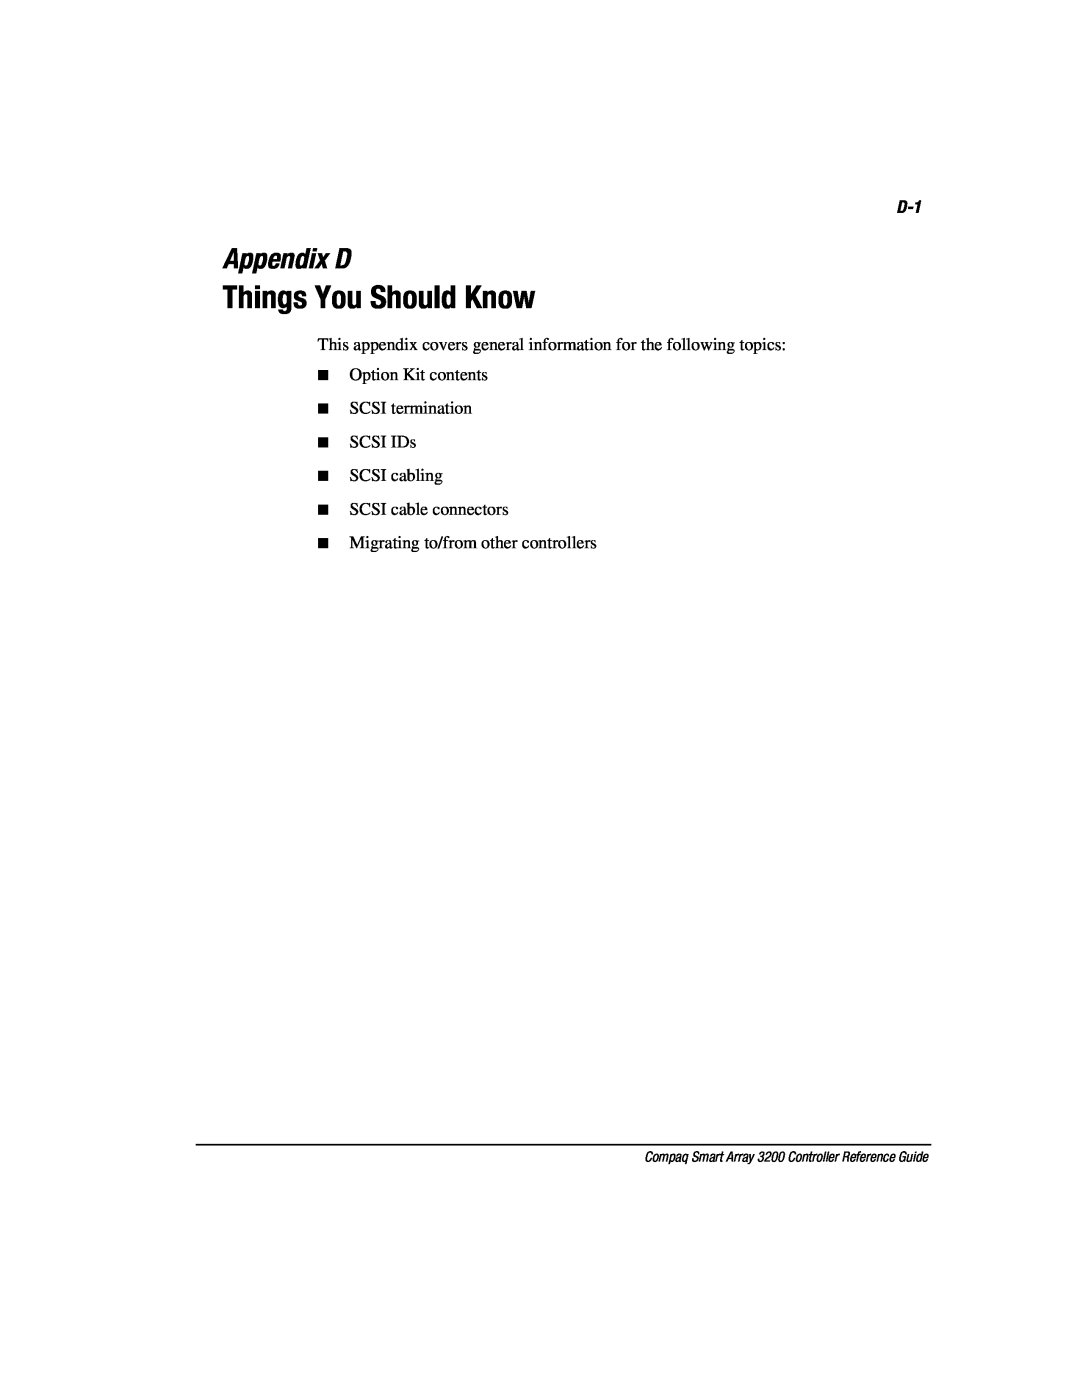 Compaq manual Things You Should Know, Appendix D, Compaq Smart Array 3200 Controller Reference Guide 